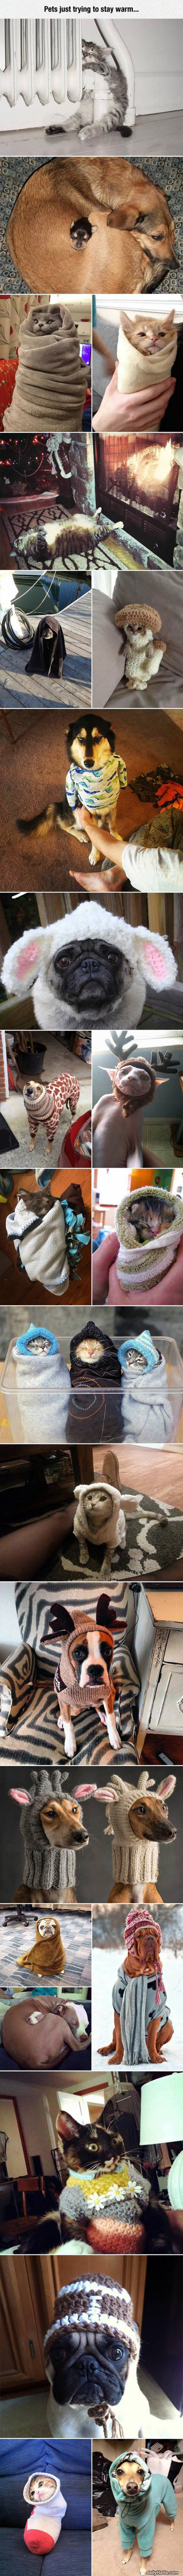 pets staying warm funny picture